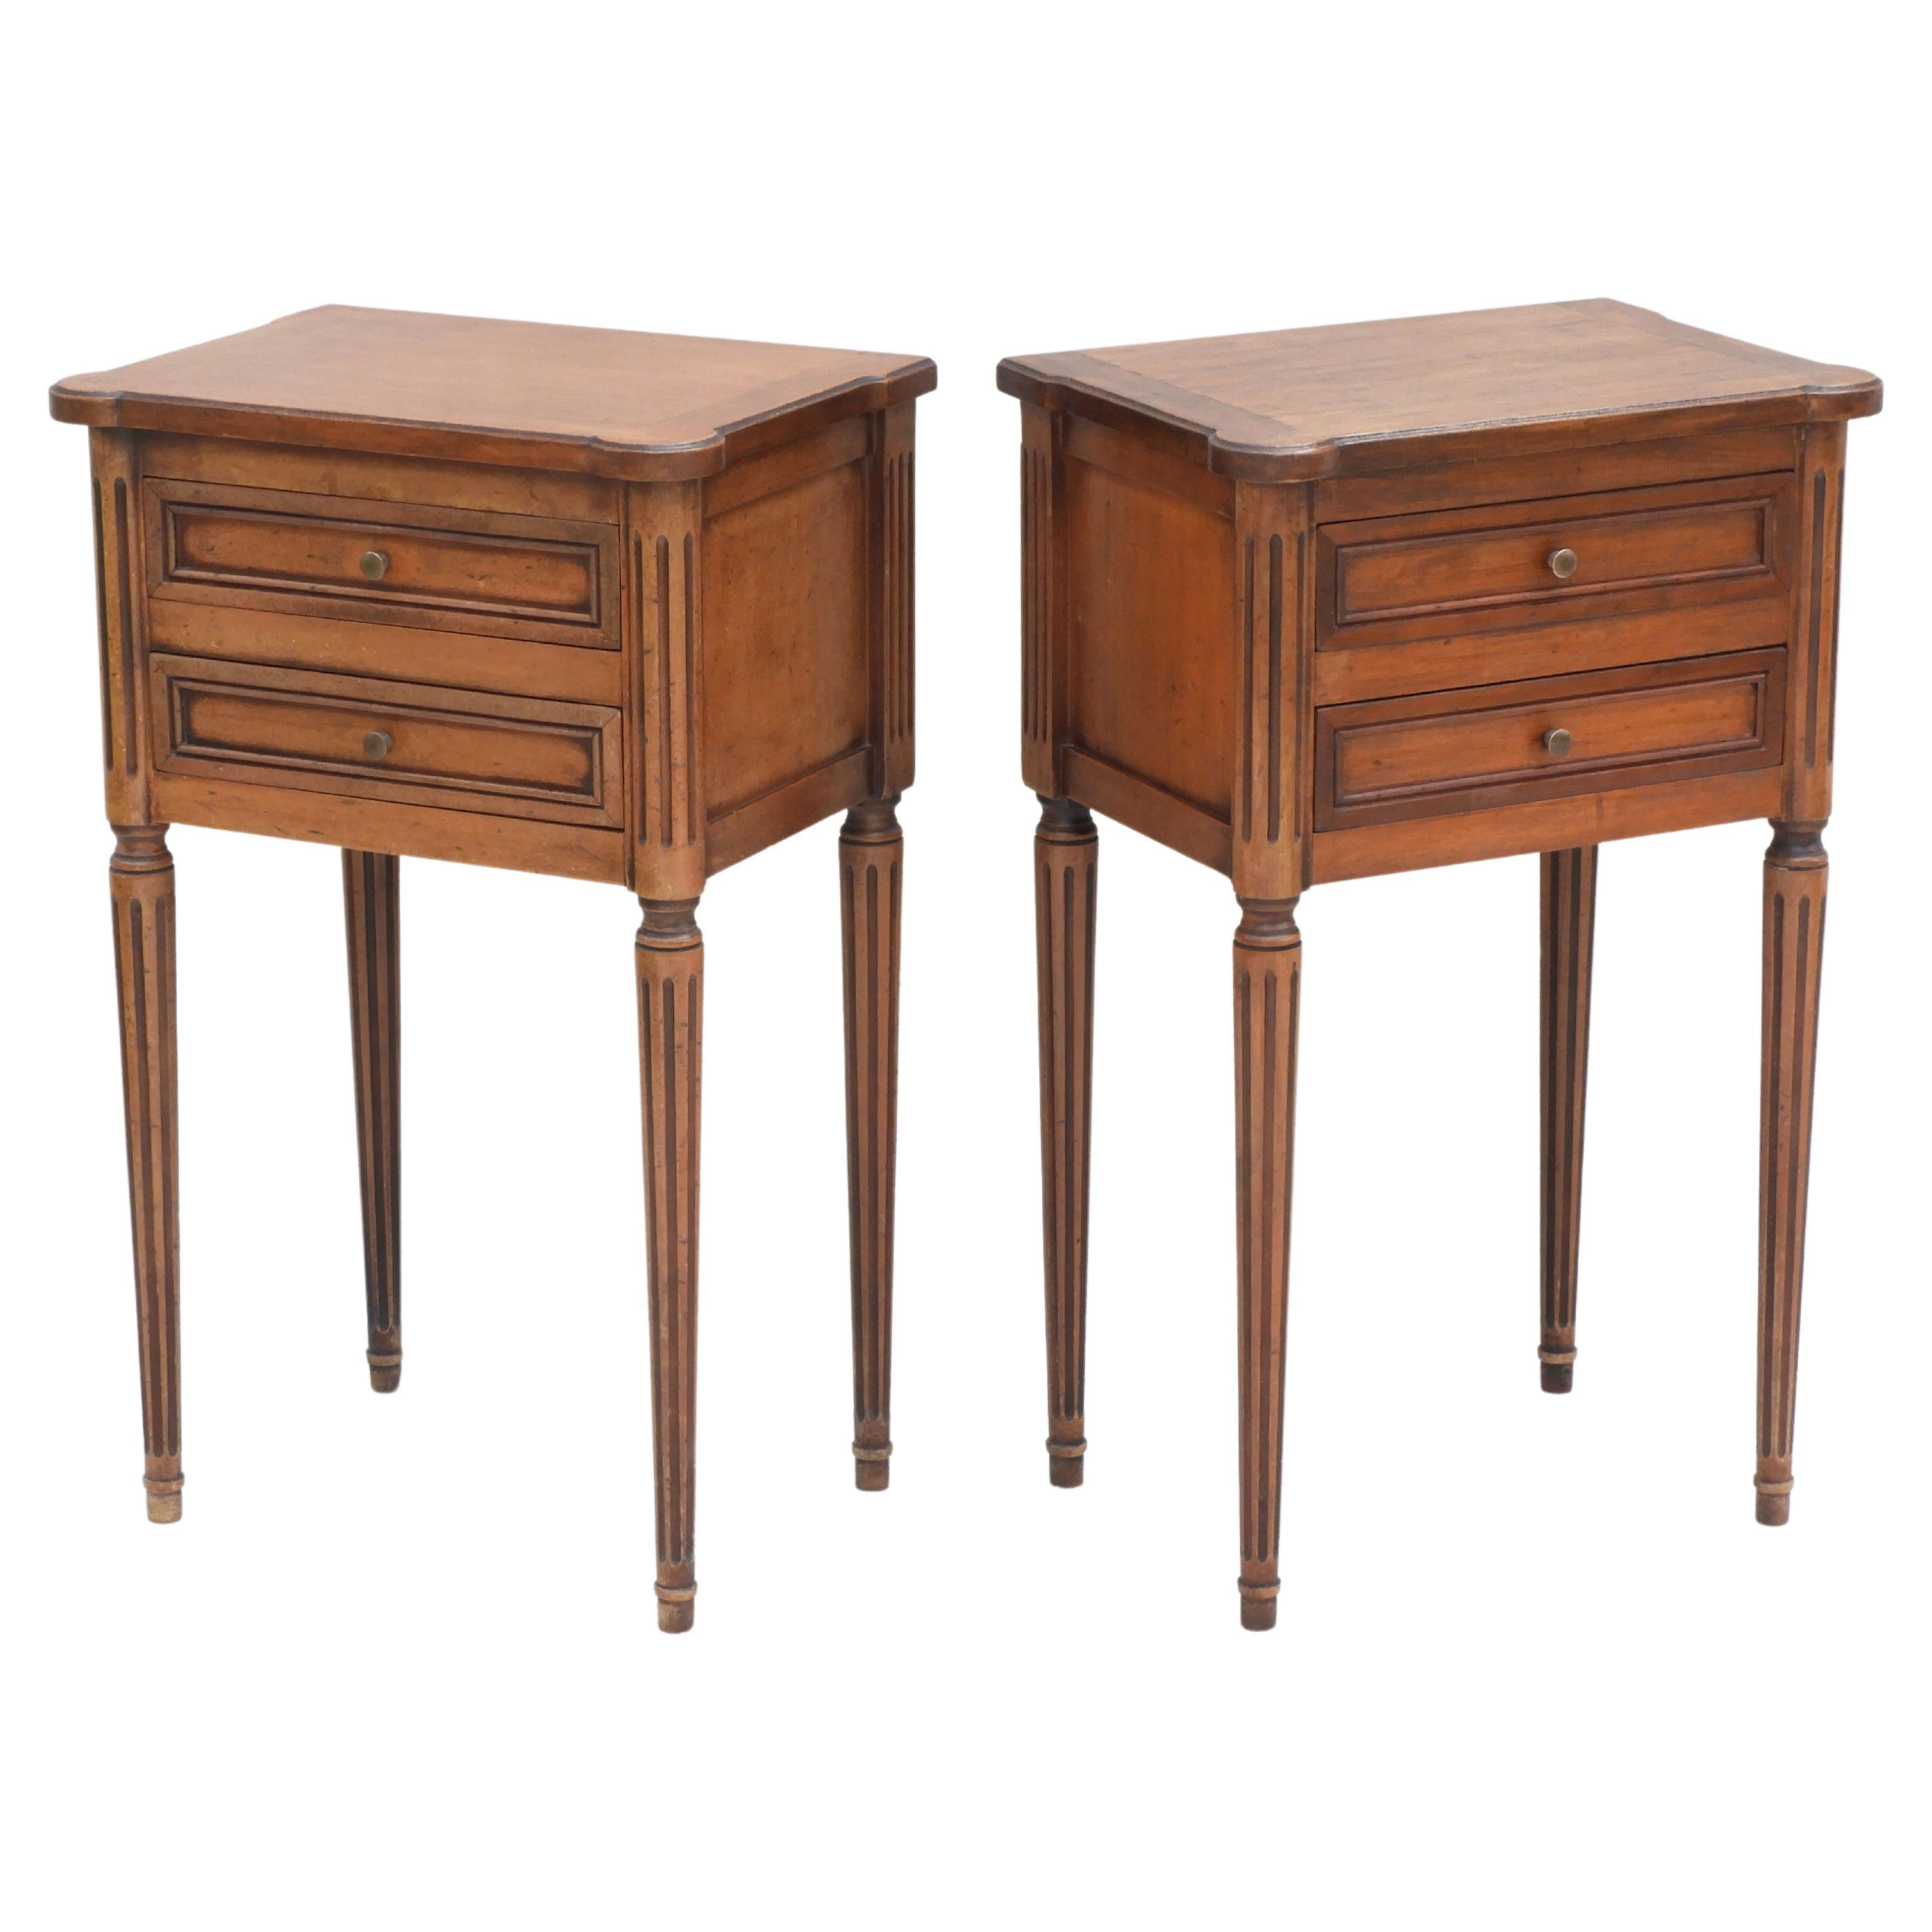 Pair of French Louis XVI Revival Nightstands/Bed Side Tables, C1950